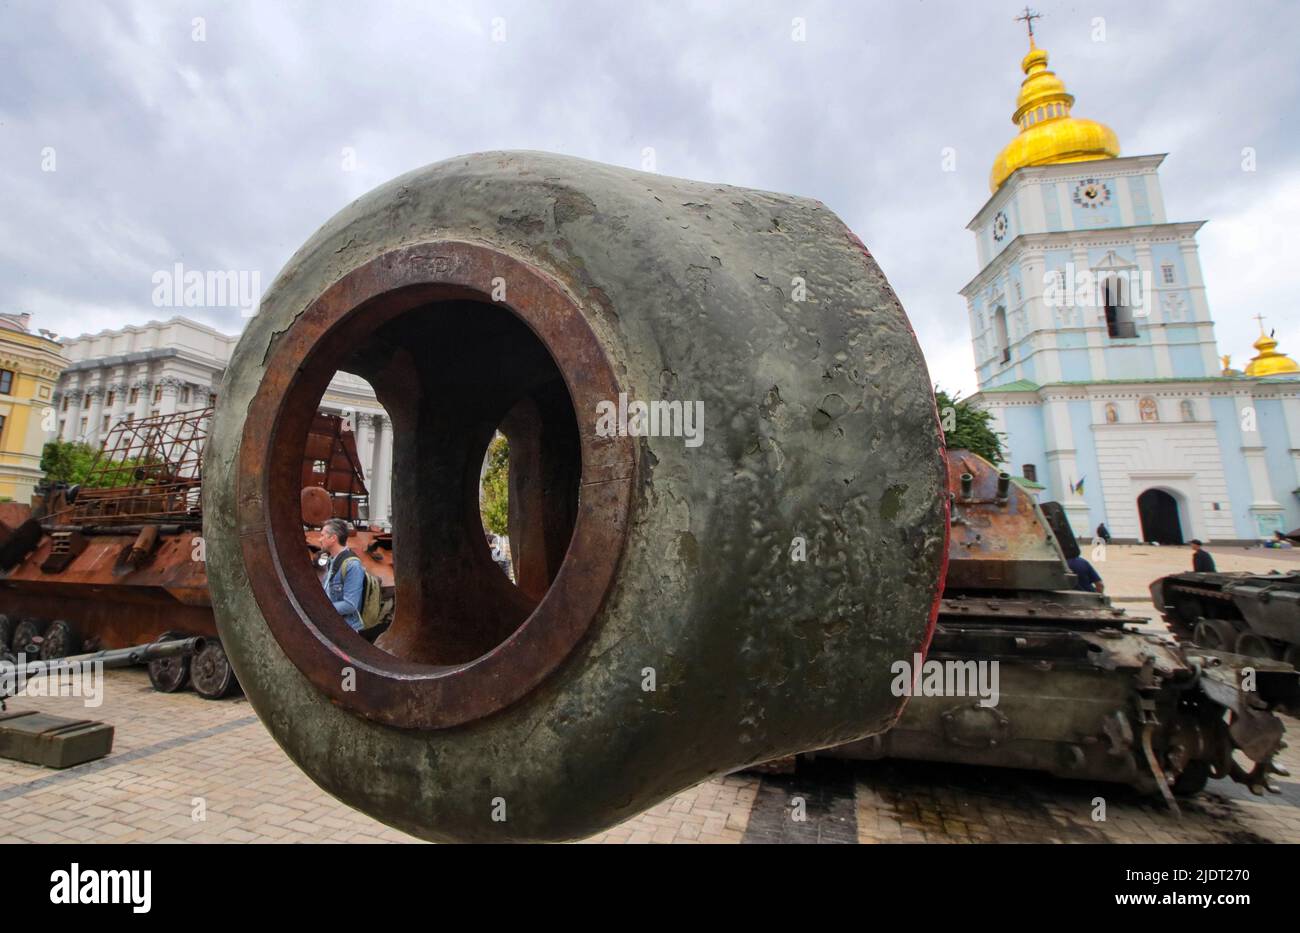 Non Exclusive: KYIV, UKRAINE - MAY 28, 2022 - The exhibition of destroyed Russian military vehicles is situated in Mykhailivska Square, Kyiv, capital Stock Photo